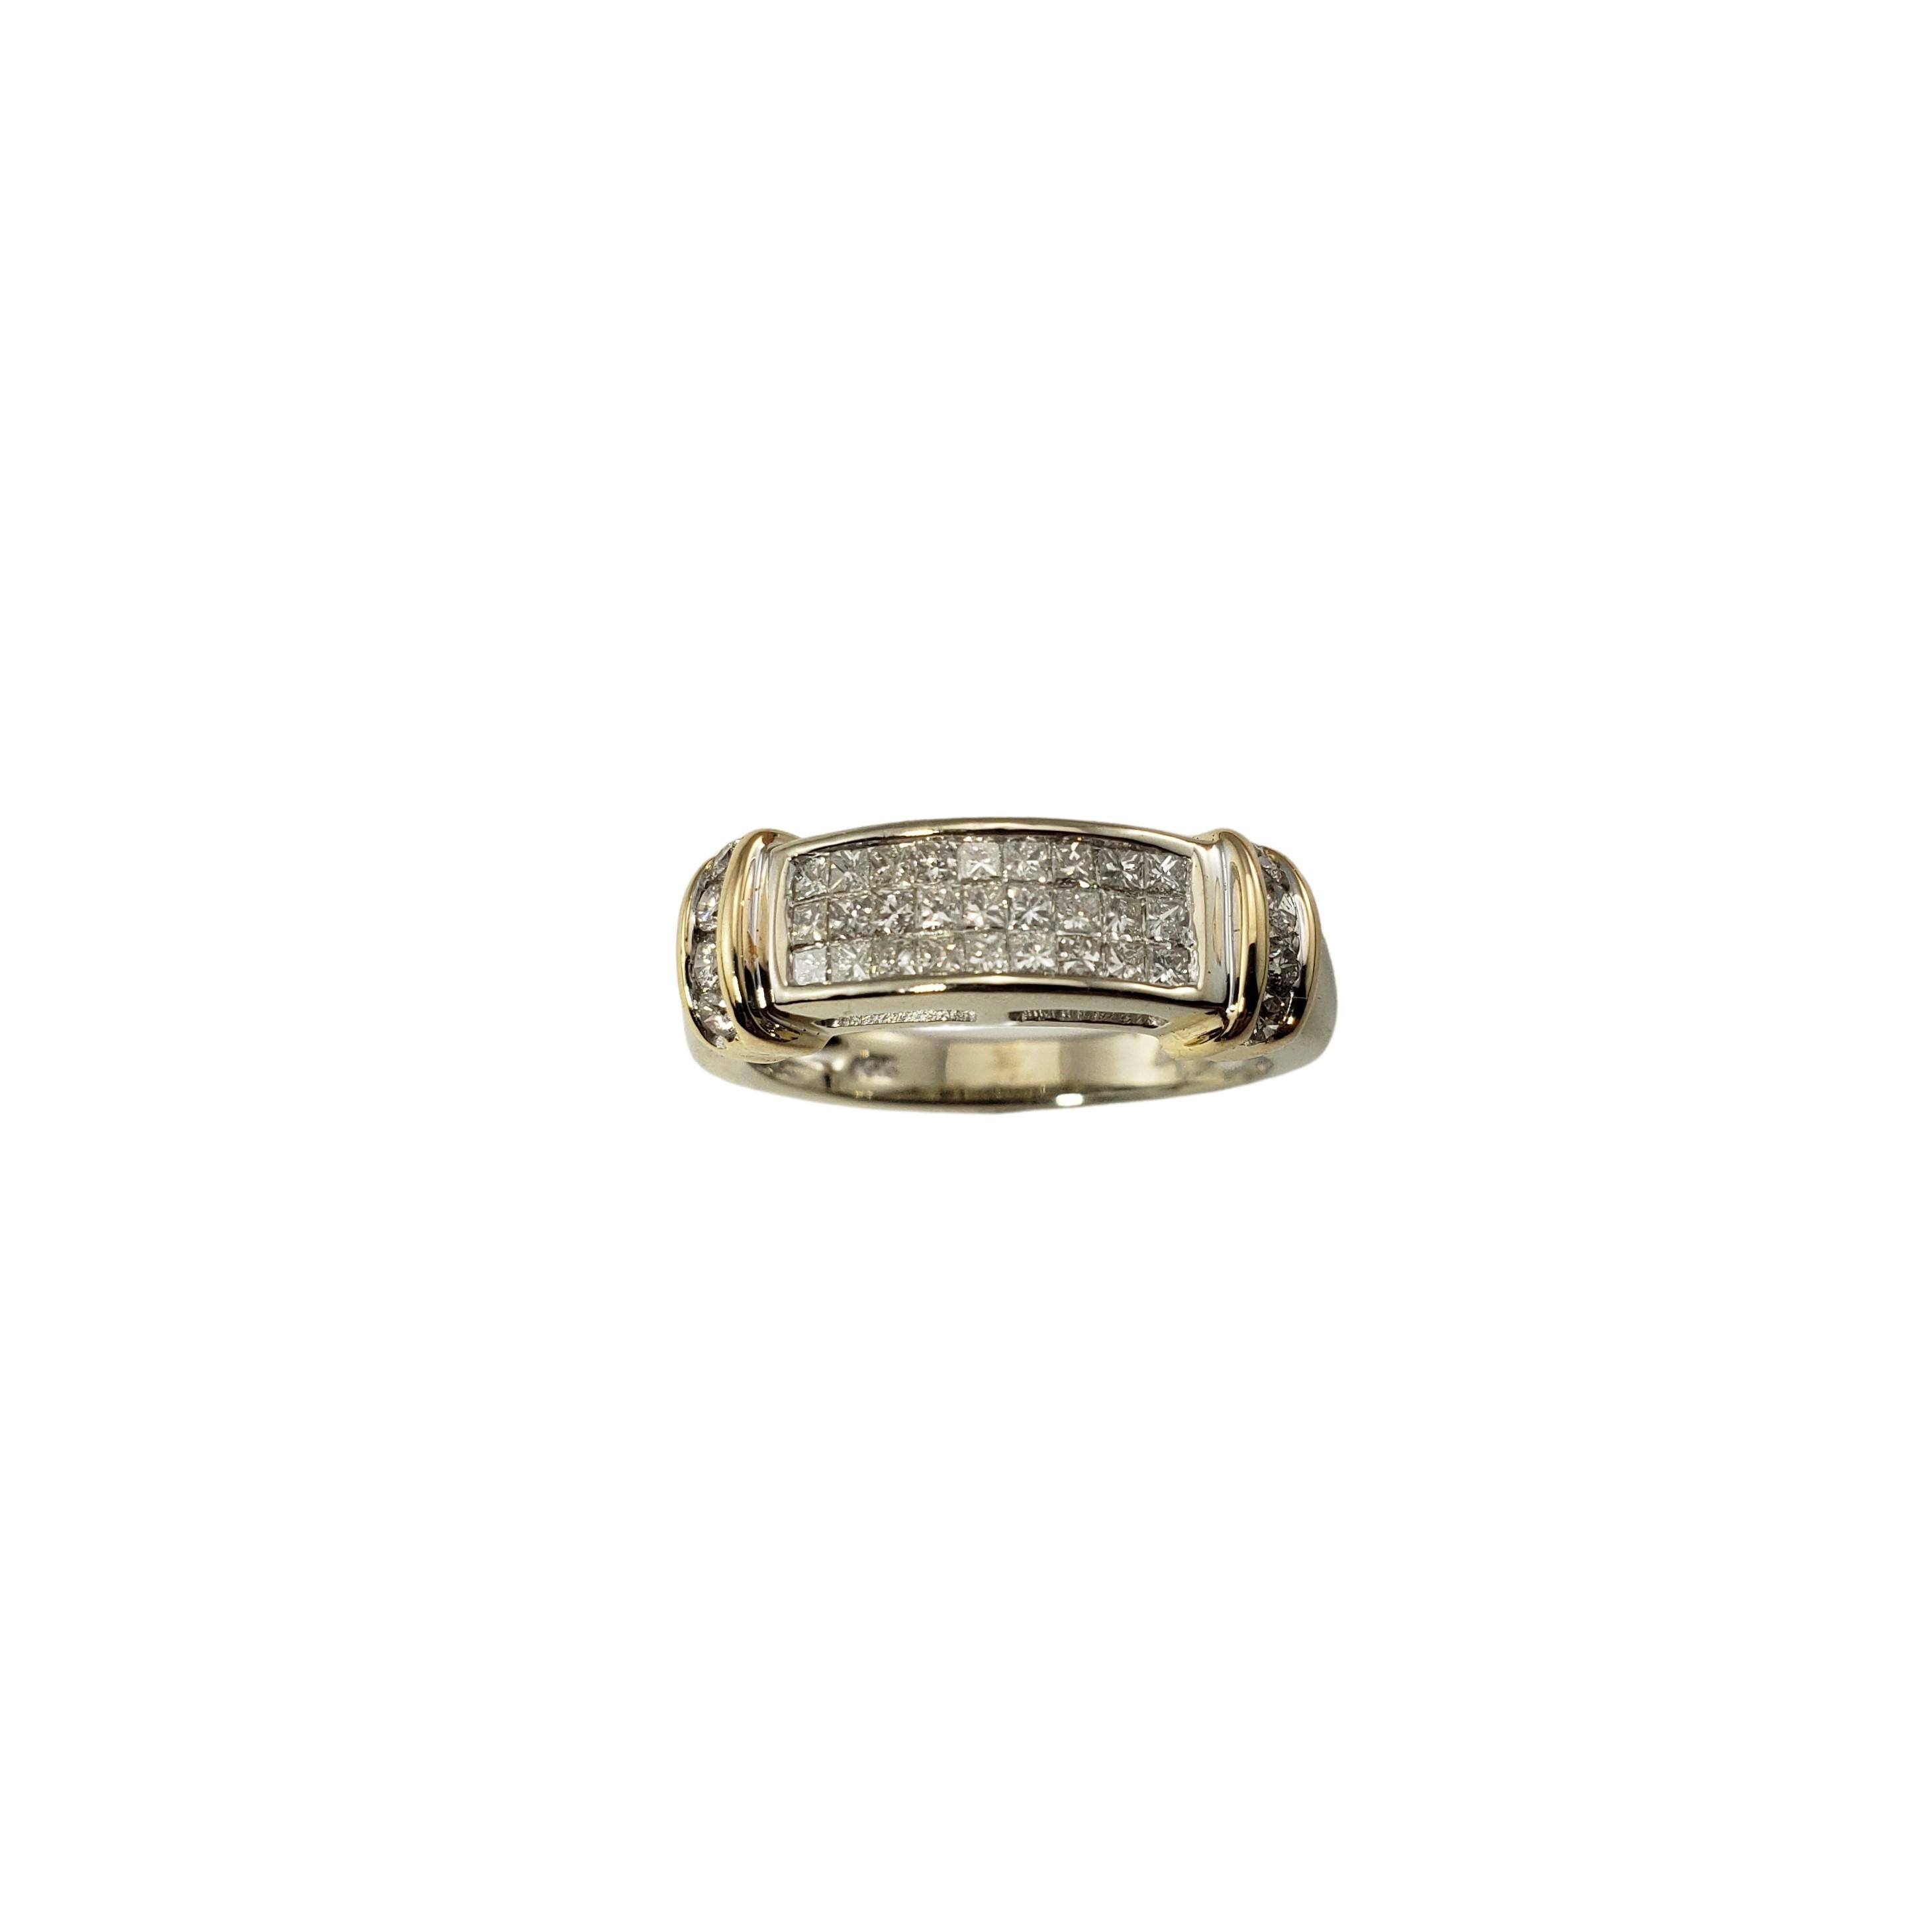 14 Karat Yellow Gold and Diamond Ring Size 7.25-

This sparkling ring features 27 princess cut diamonds and 8 round brilliant cut diamonds set in classic 14K yellow gold.  
Width:  7 mm.  Shank:  3 mm.

Approximate total diamond weight:  .70